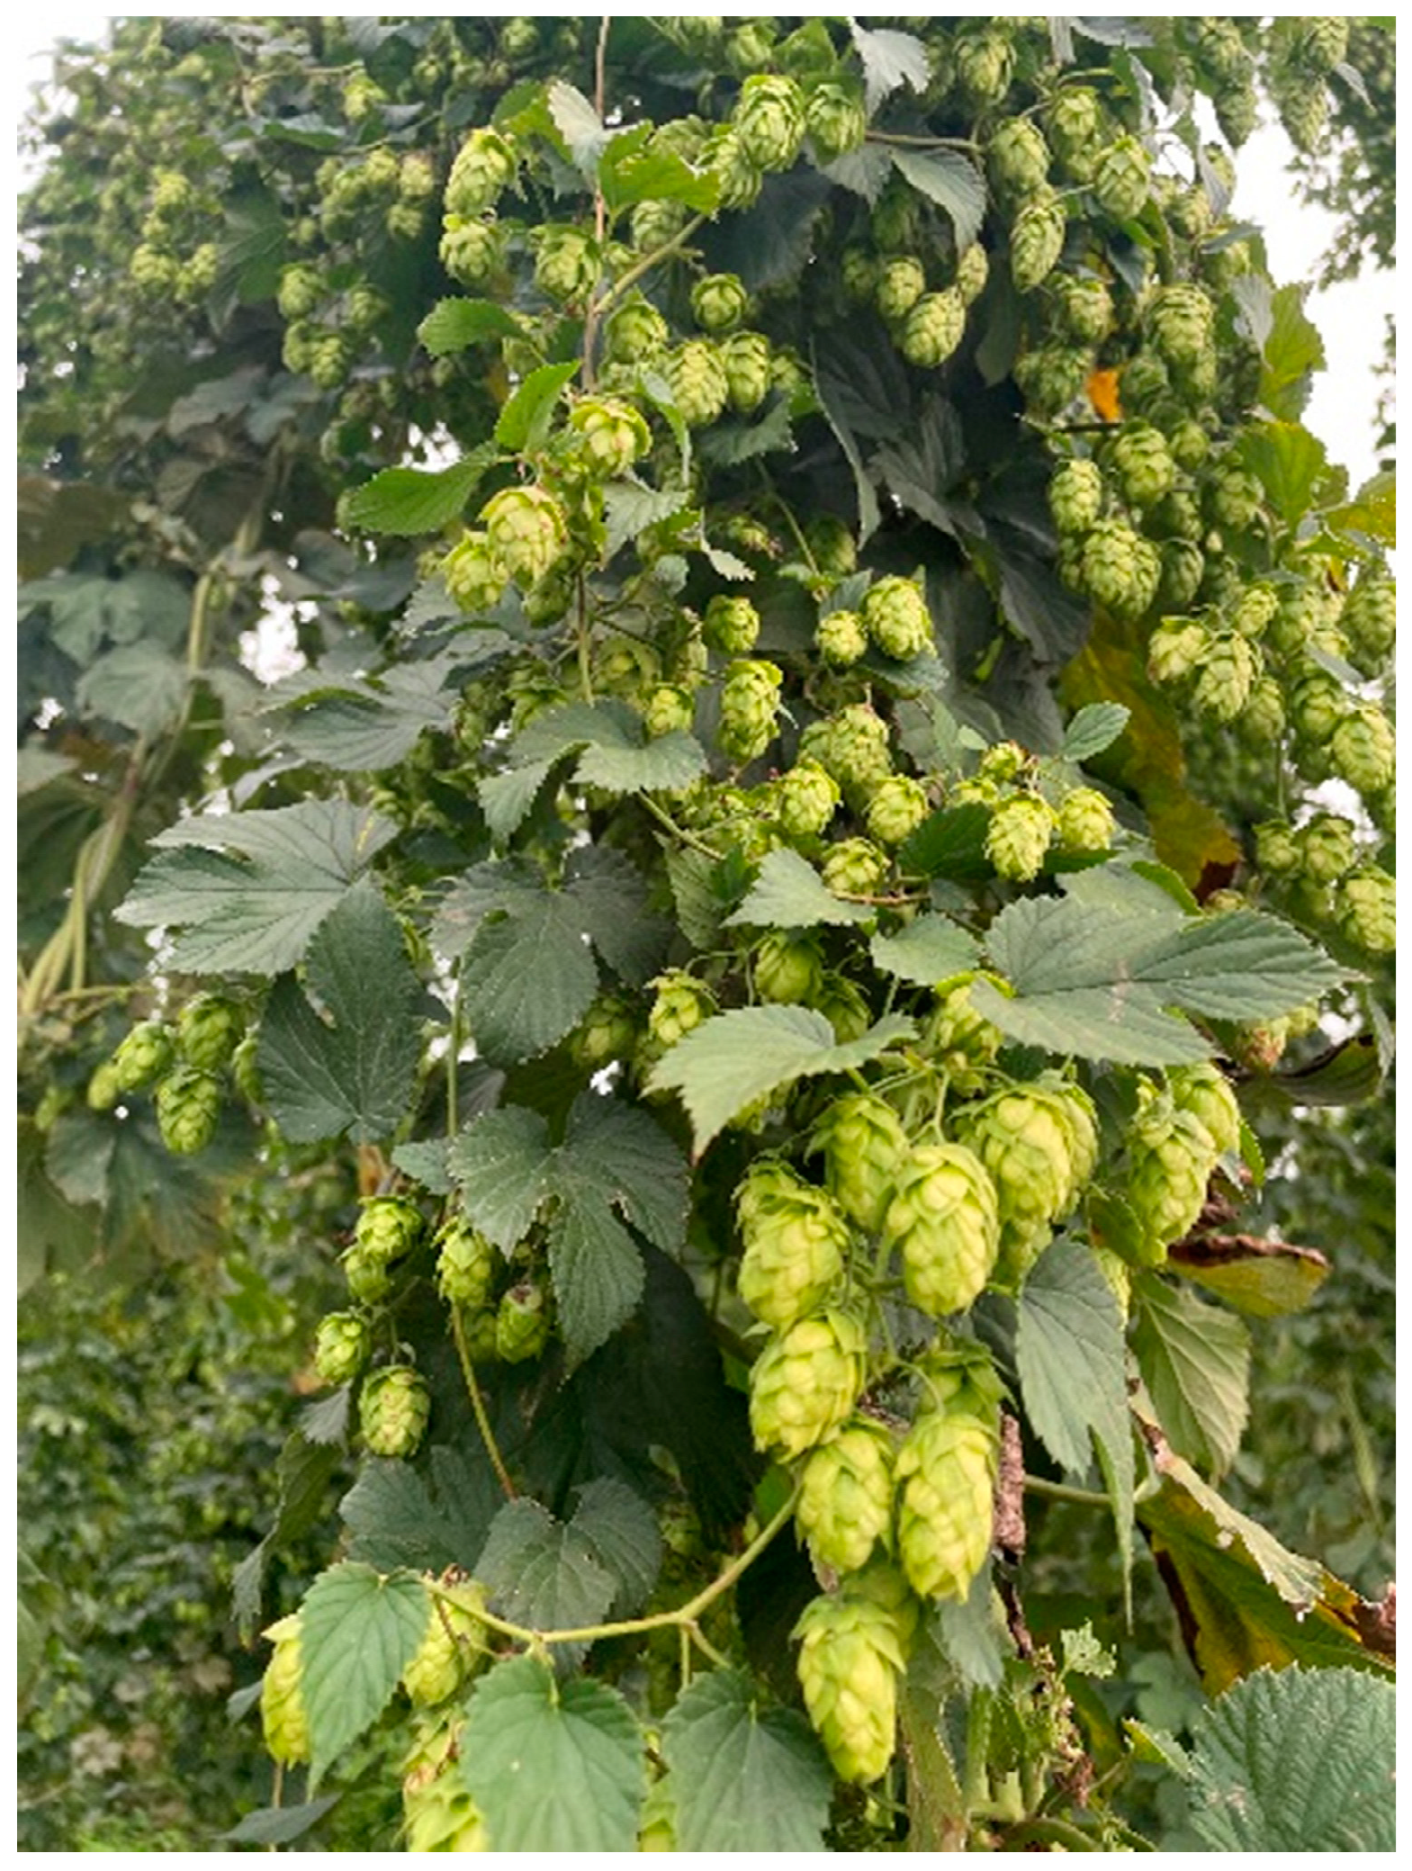 Horticulturae | Free Full-Text | Hop (Humulus lupulus L.) Essential Oils  and Xanthohumol Derived from Extraction Process Using Solvents of Different  Polarity | HTML